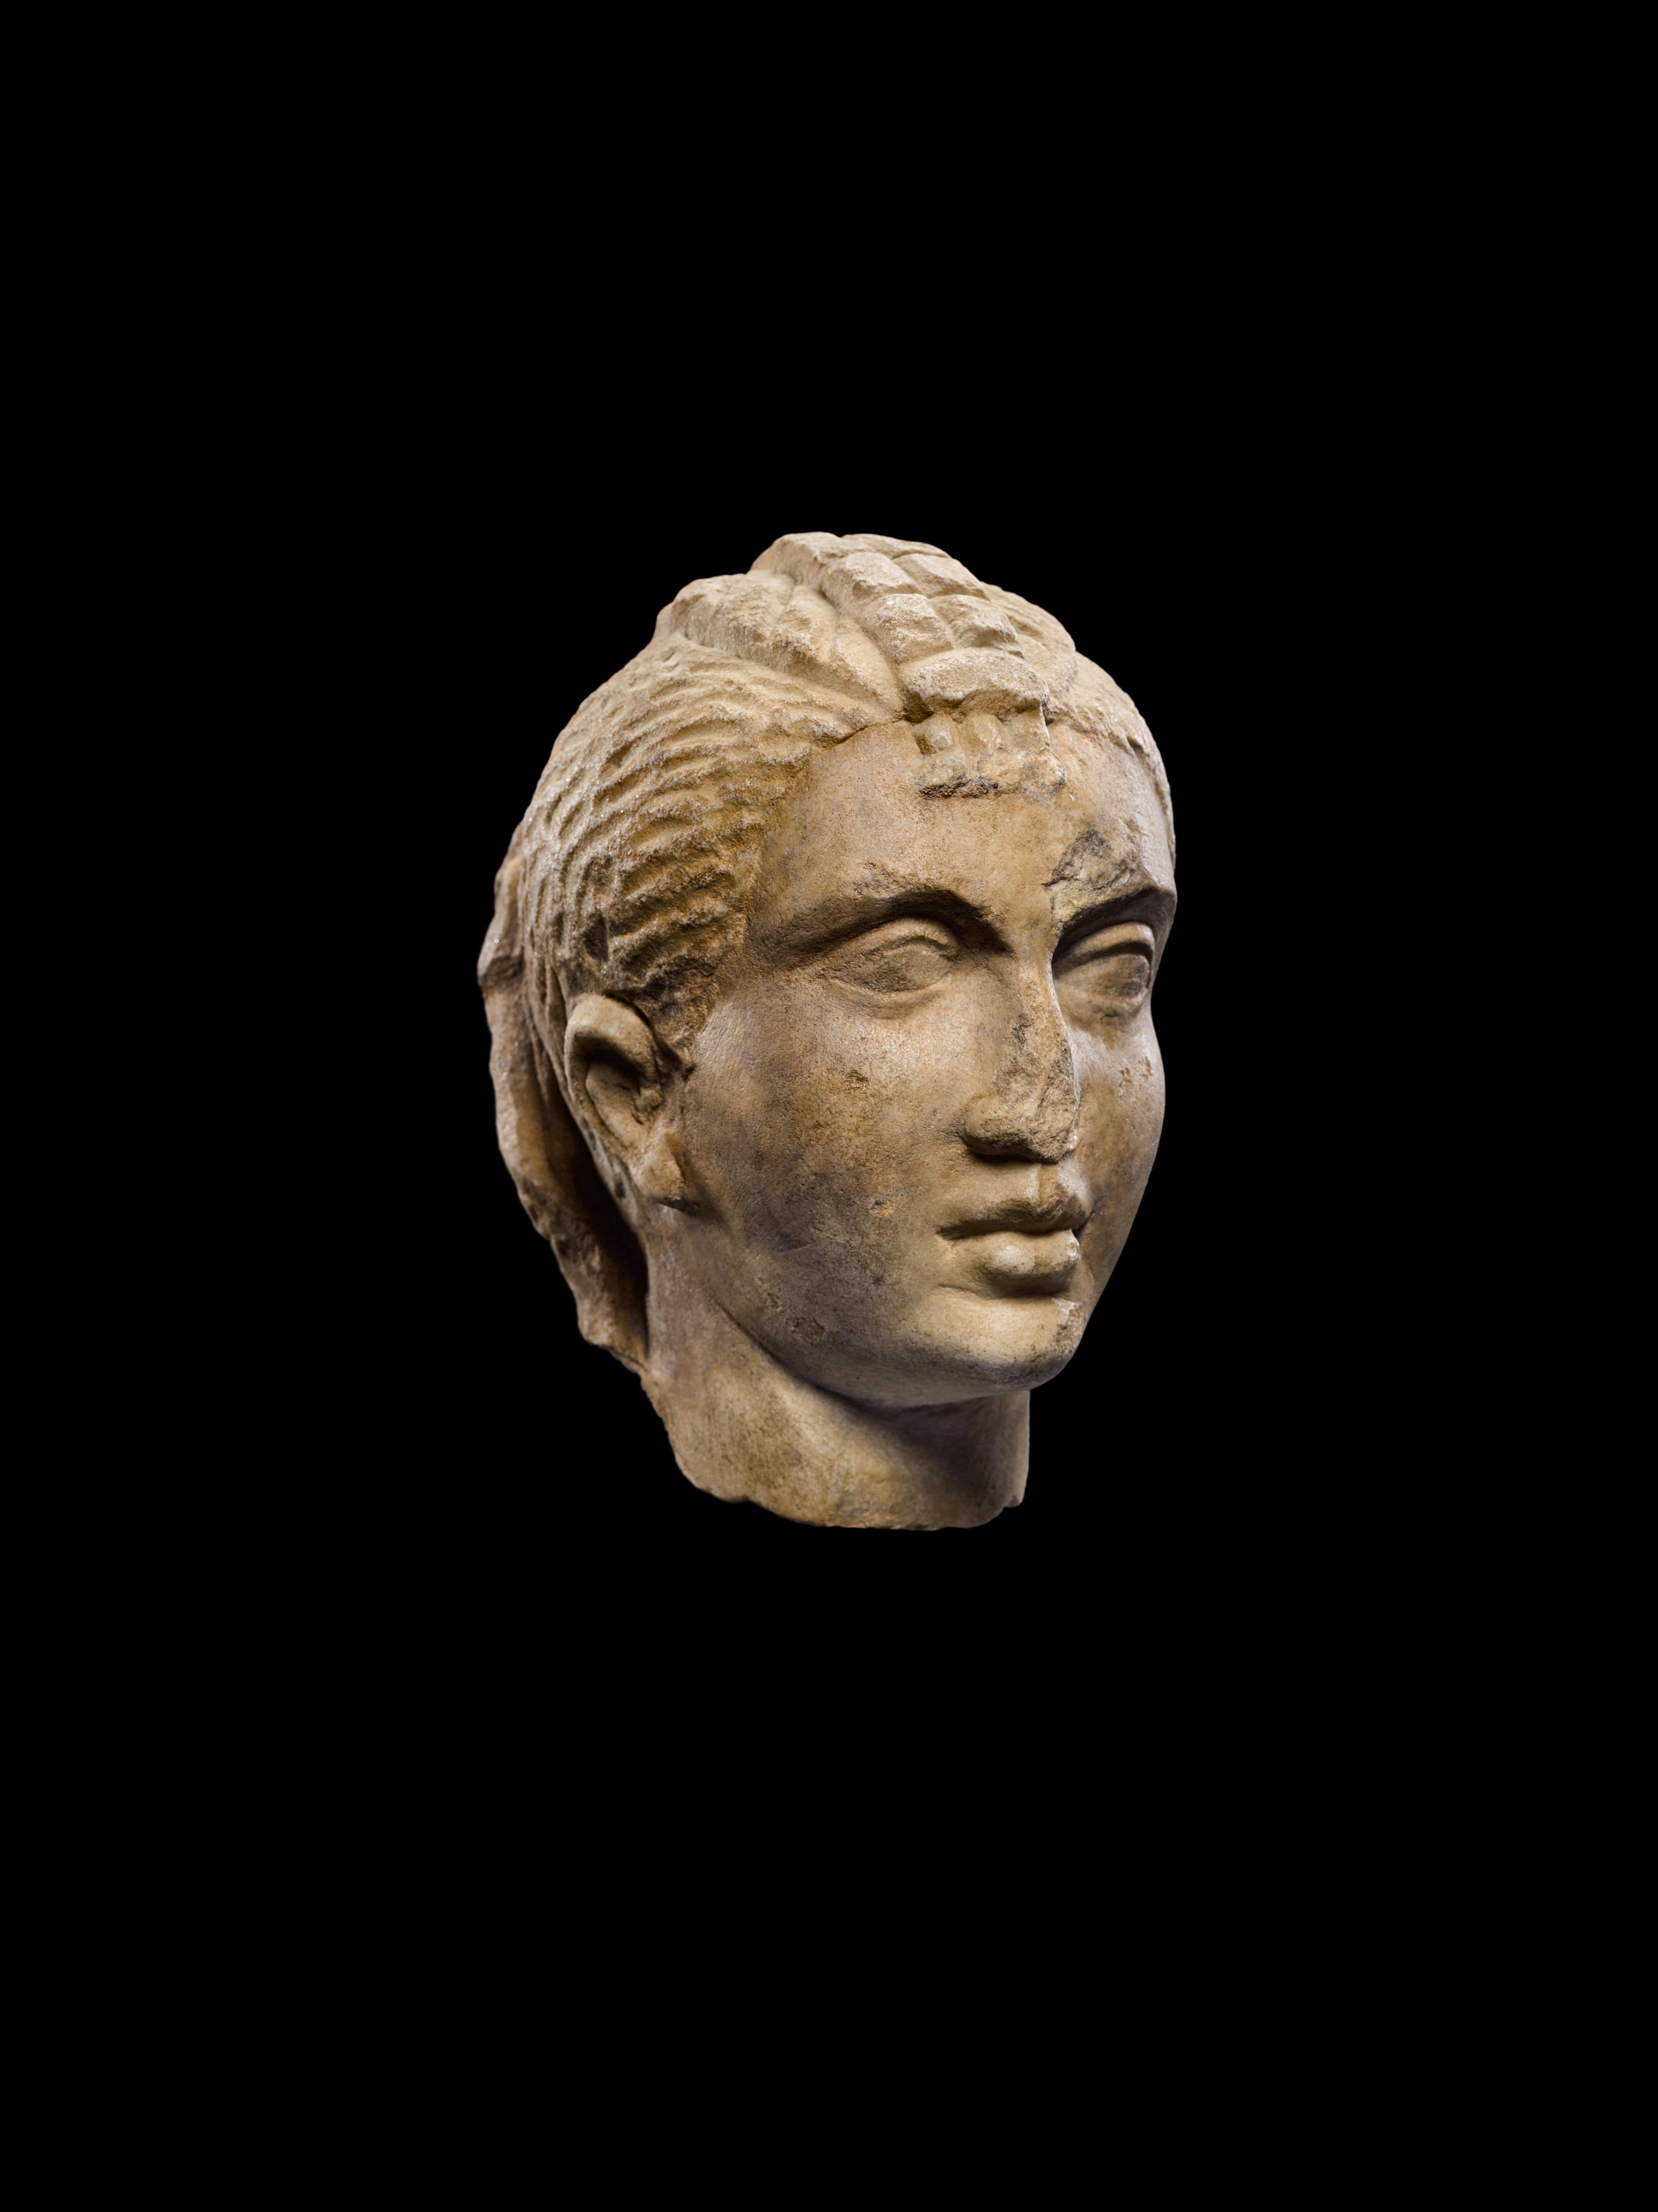 PORTRAIT HEAD OF A GIRL

Rome, circa 2nd/3rd century A.D.
Marble
height 18.4 cm
height 7 1/4 in

Provenance:
Sotheby's, London, May 23rd, 1988, no. 240, illus. 
Royal-Athena Galleries, New York, by 1988
François Antonovich, Paris, by 1996